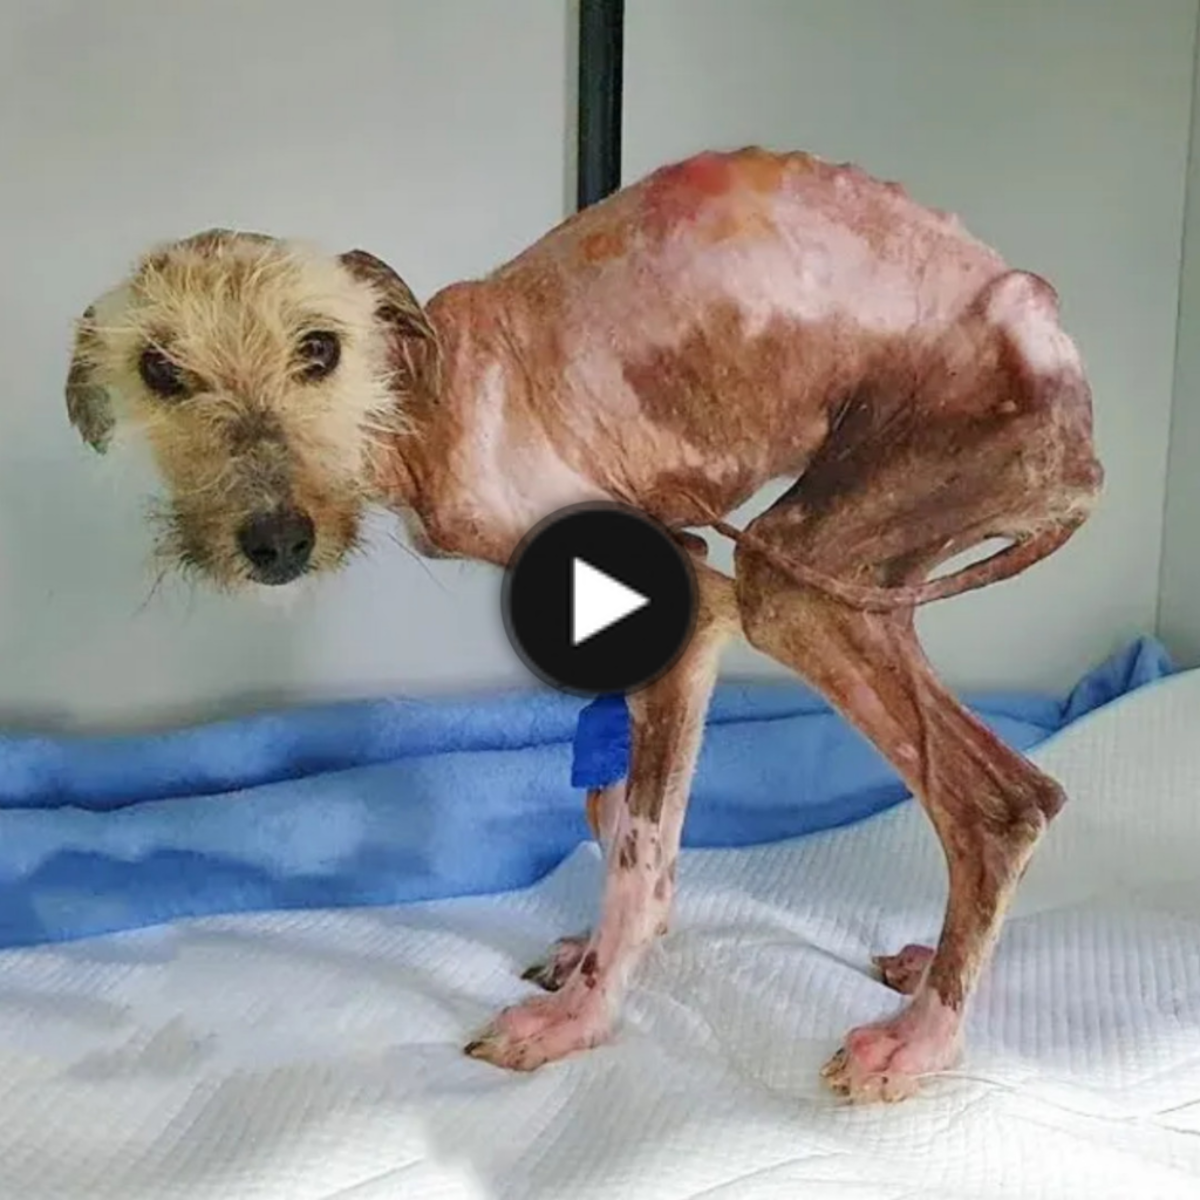 An emaciated dog survives six months of malnutrition and excruciating sores while pleading for help